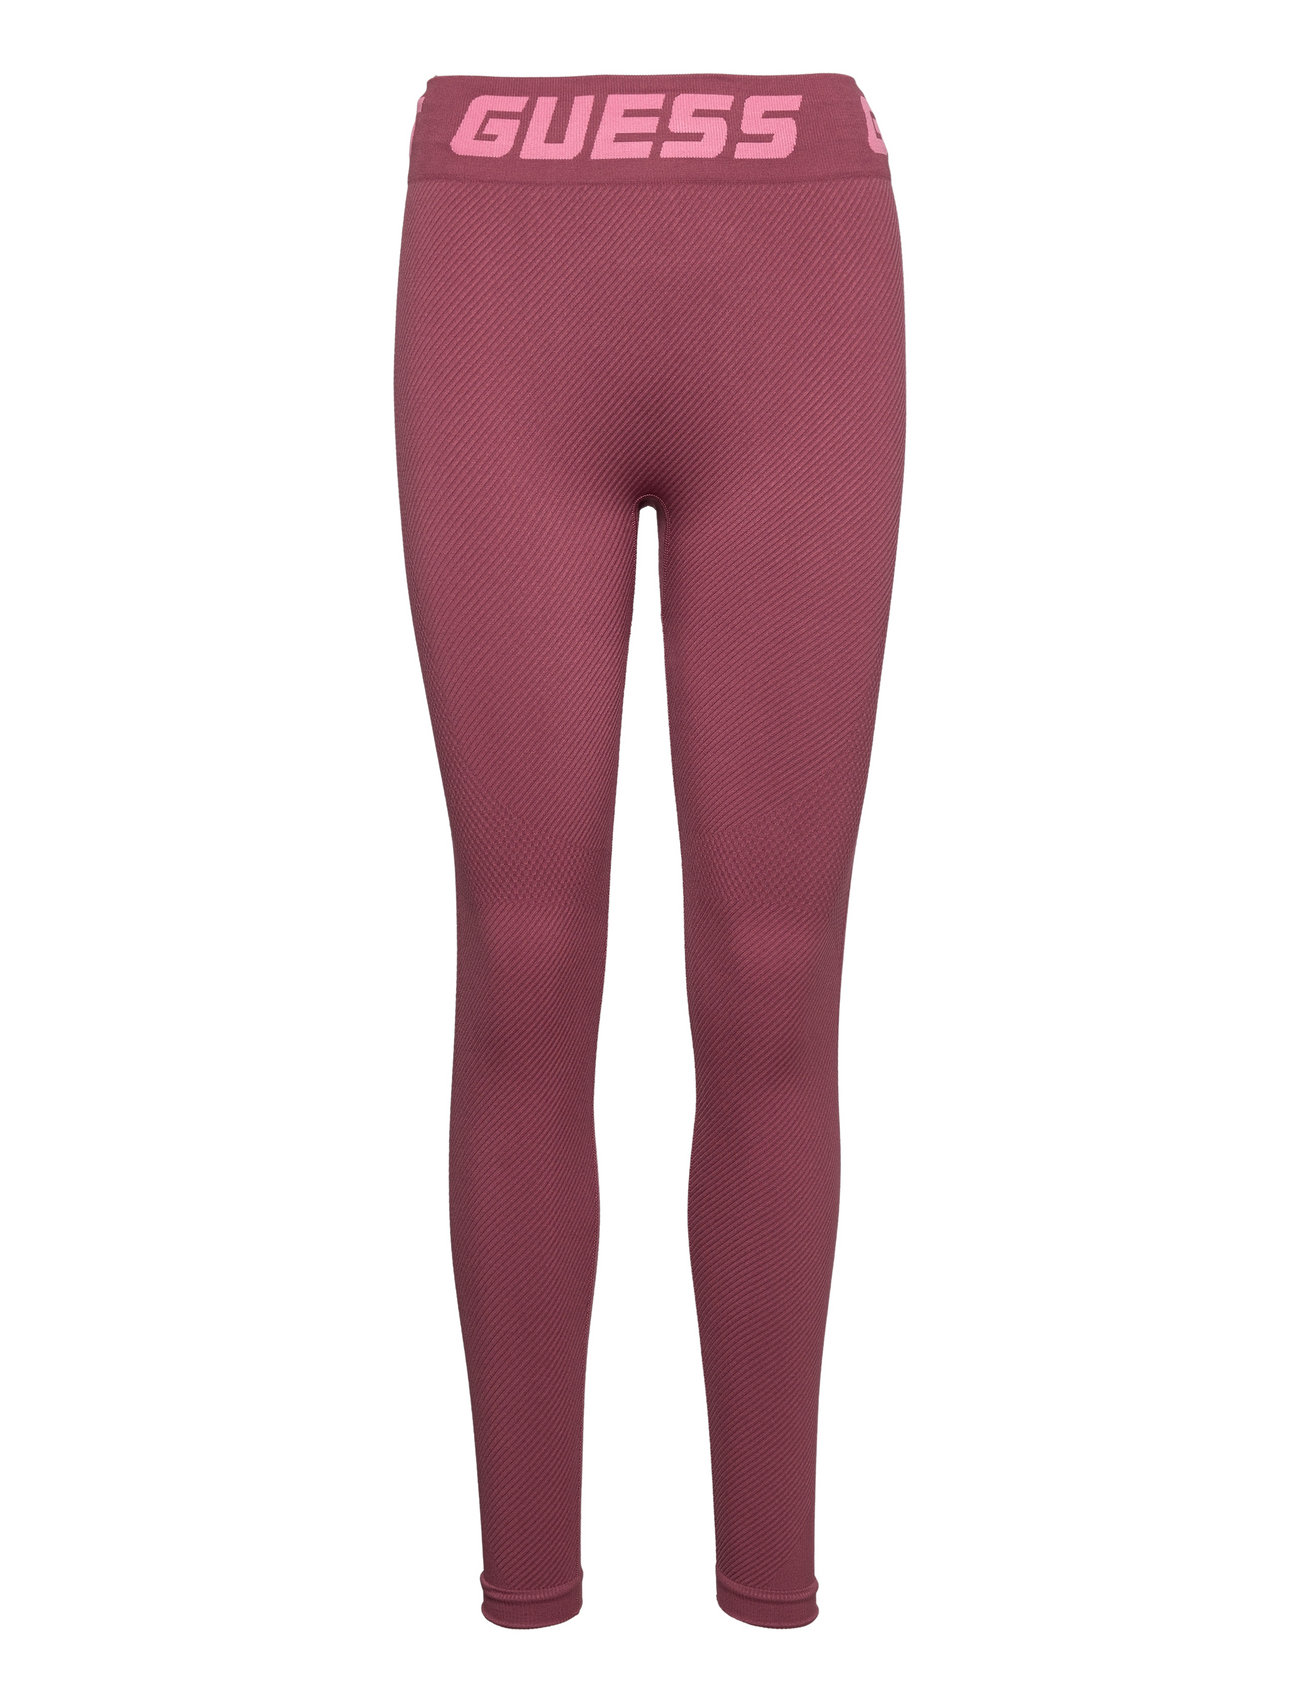 Guess Activewear Trudy Seamless Legging 4/4 – leggings & tights